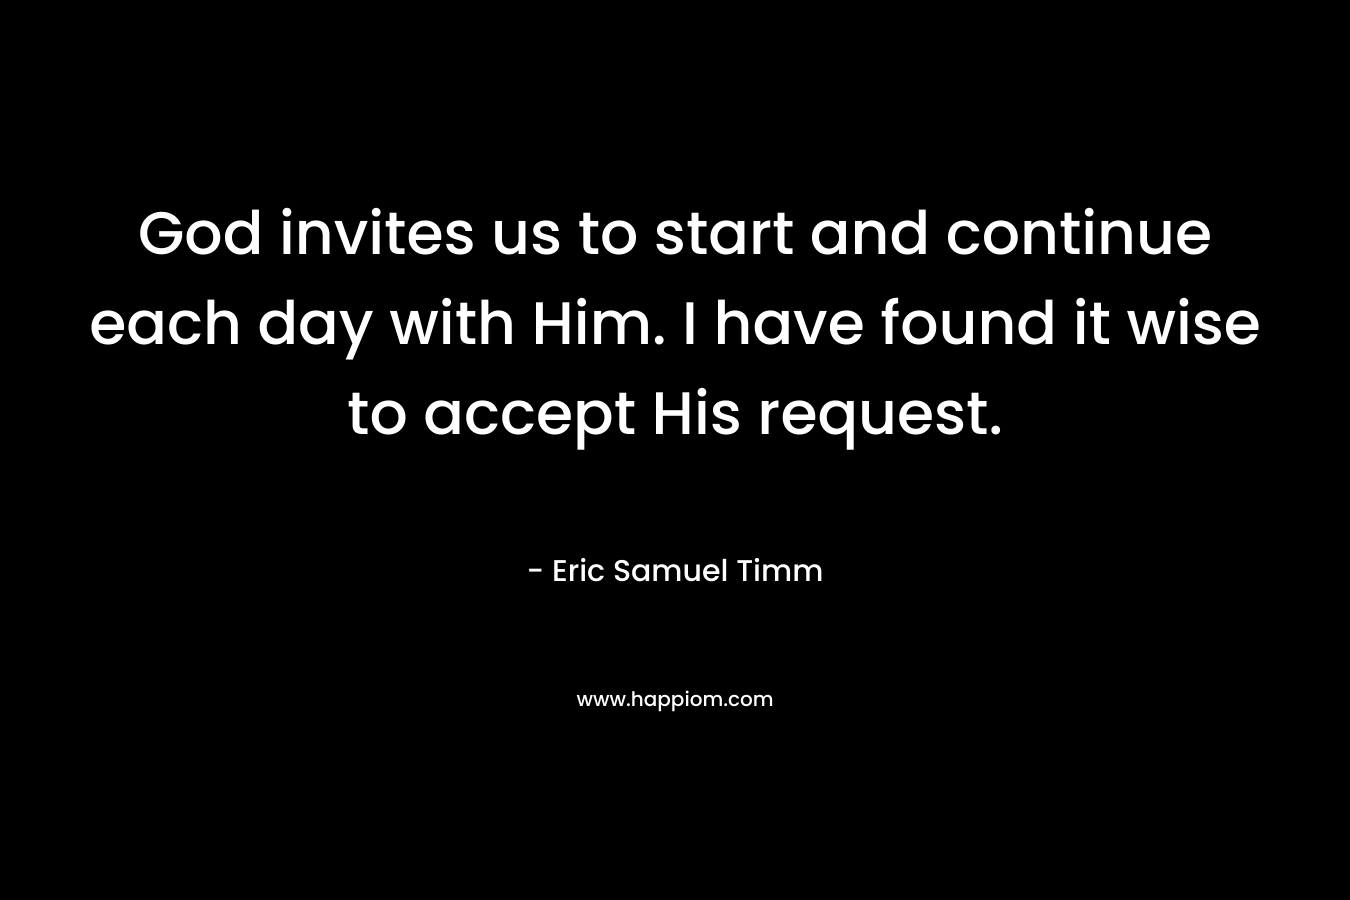 God invites us to start and continue each day with Him. I have found it wise to accept His request. – Eric Samuel Timm